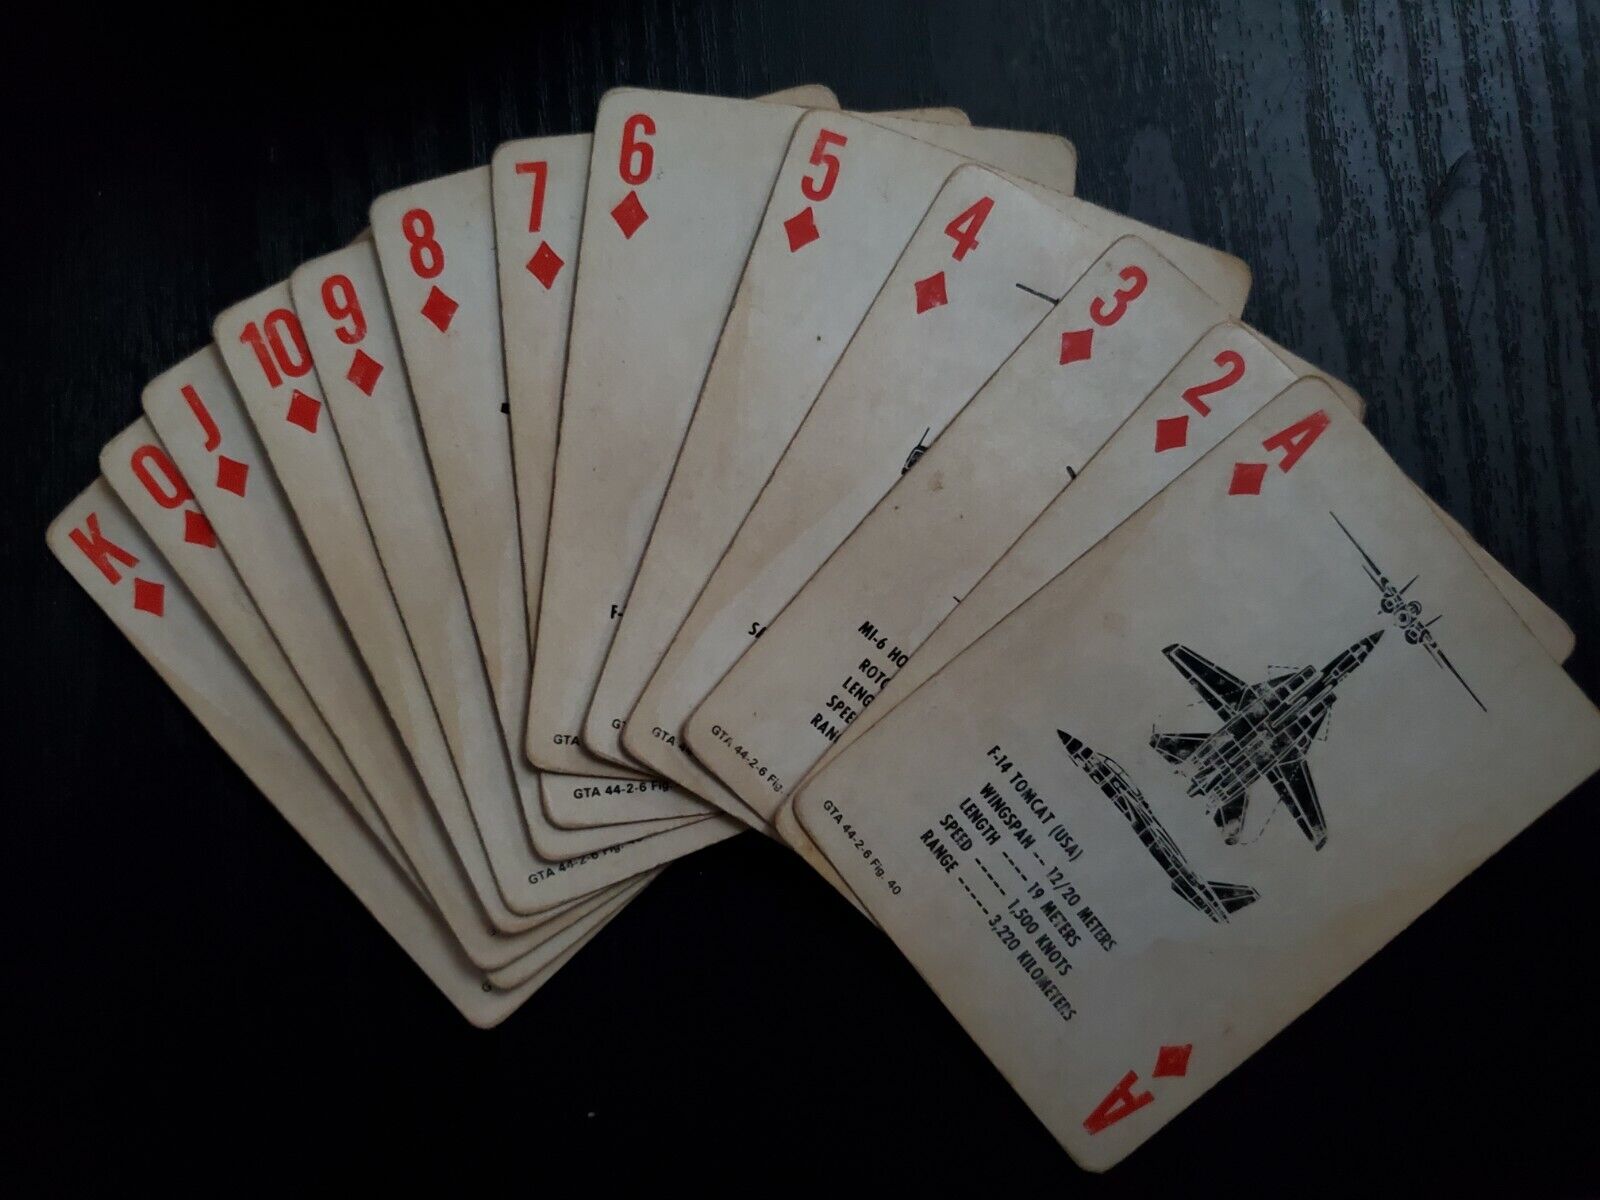 1979 Aircraft Recognition Playing Cards Graphic Training Aid 44-2-6 US Military